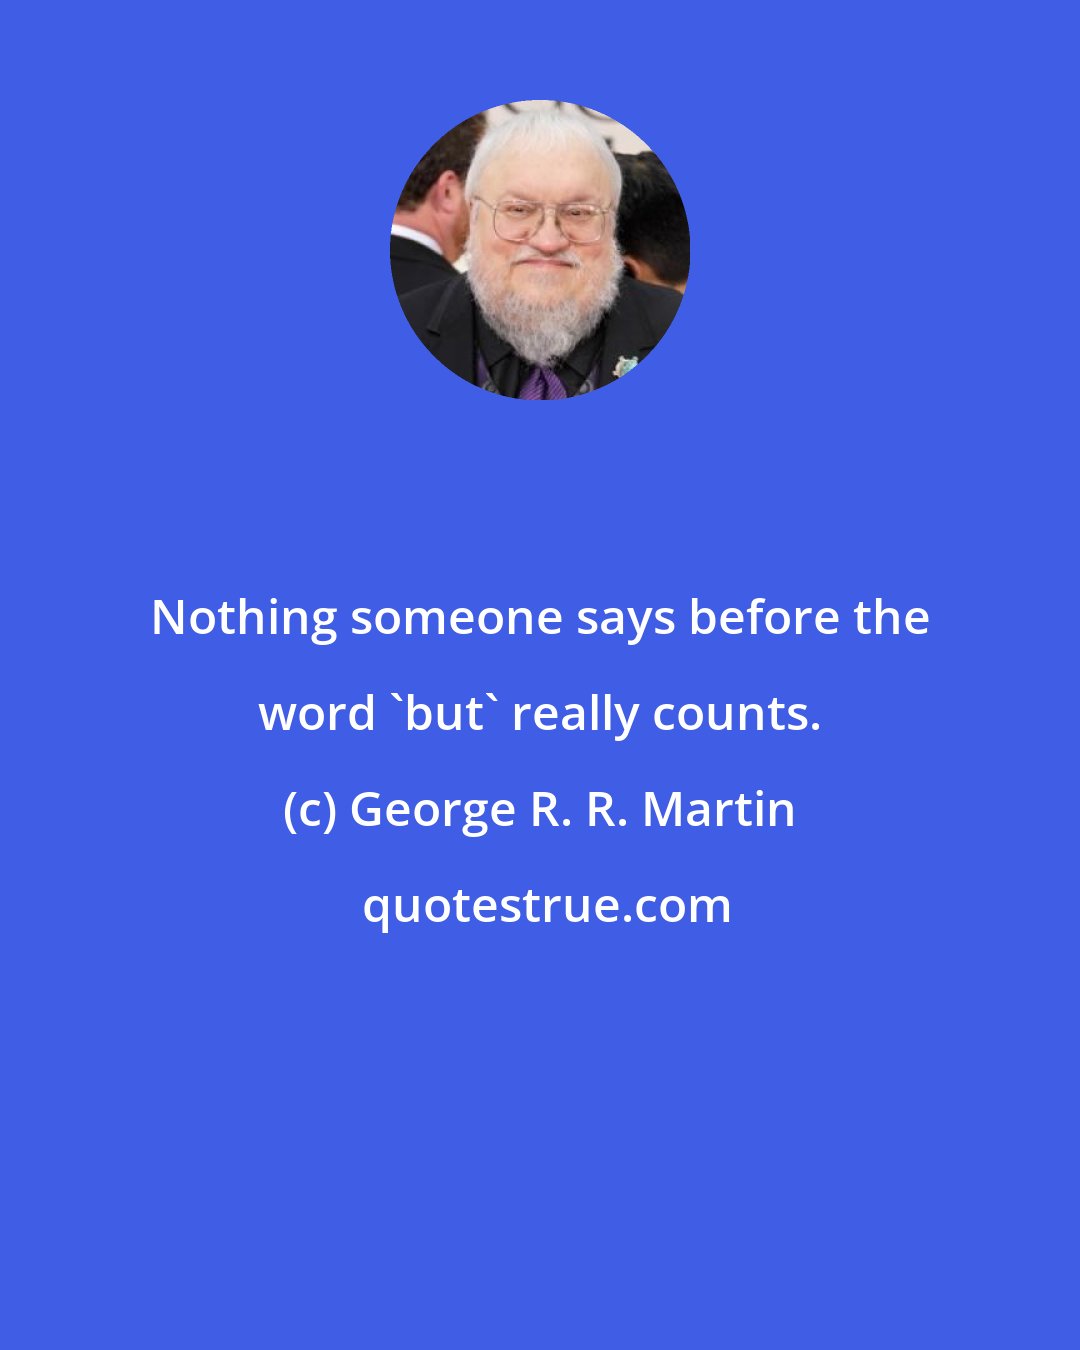 George R. R. Martin: Nothing someone says before the word 'but' really counts.